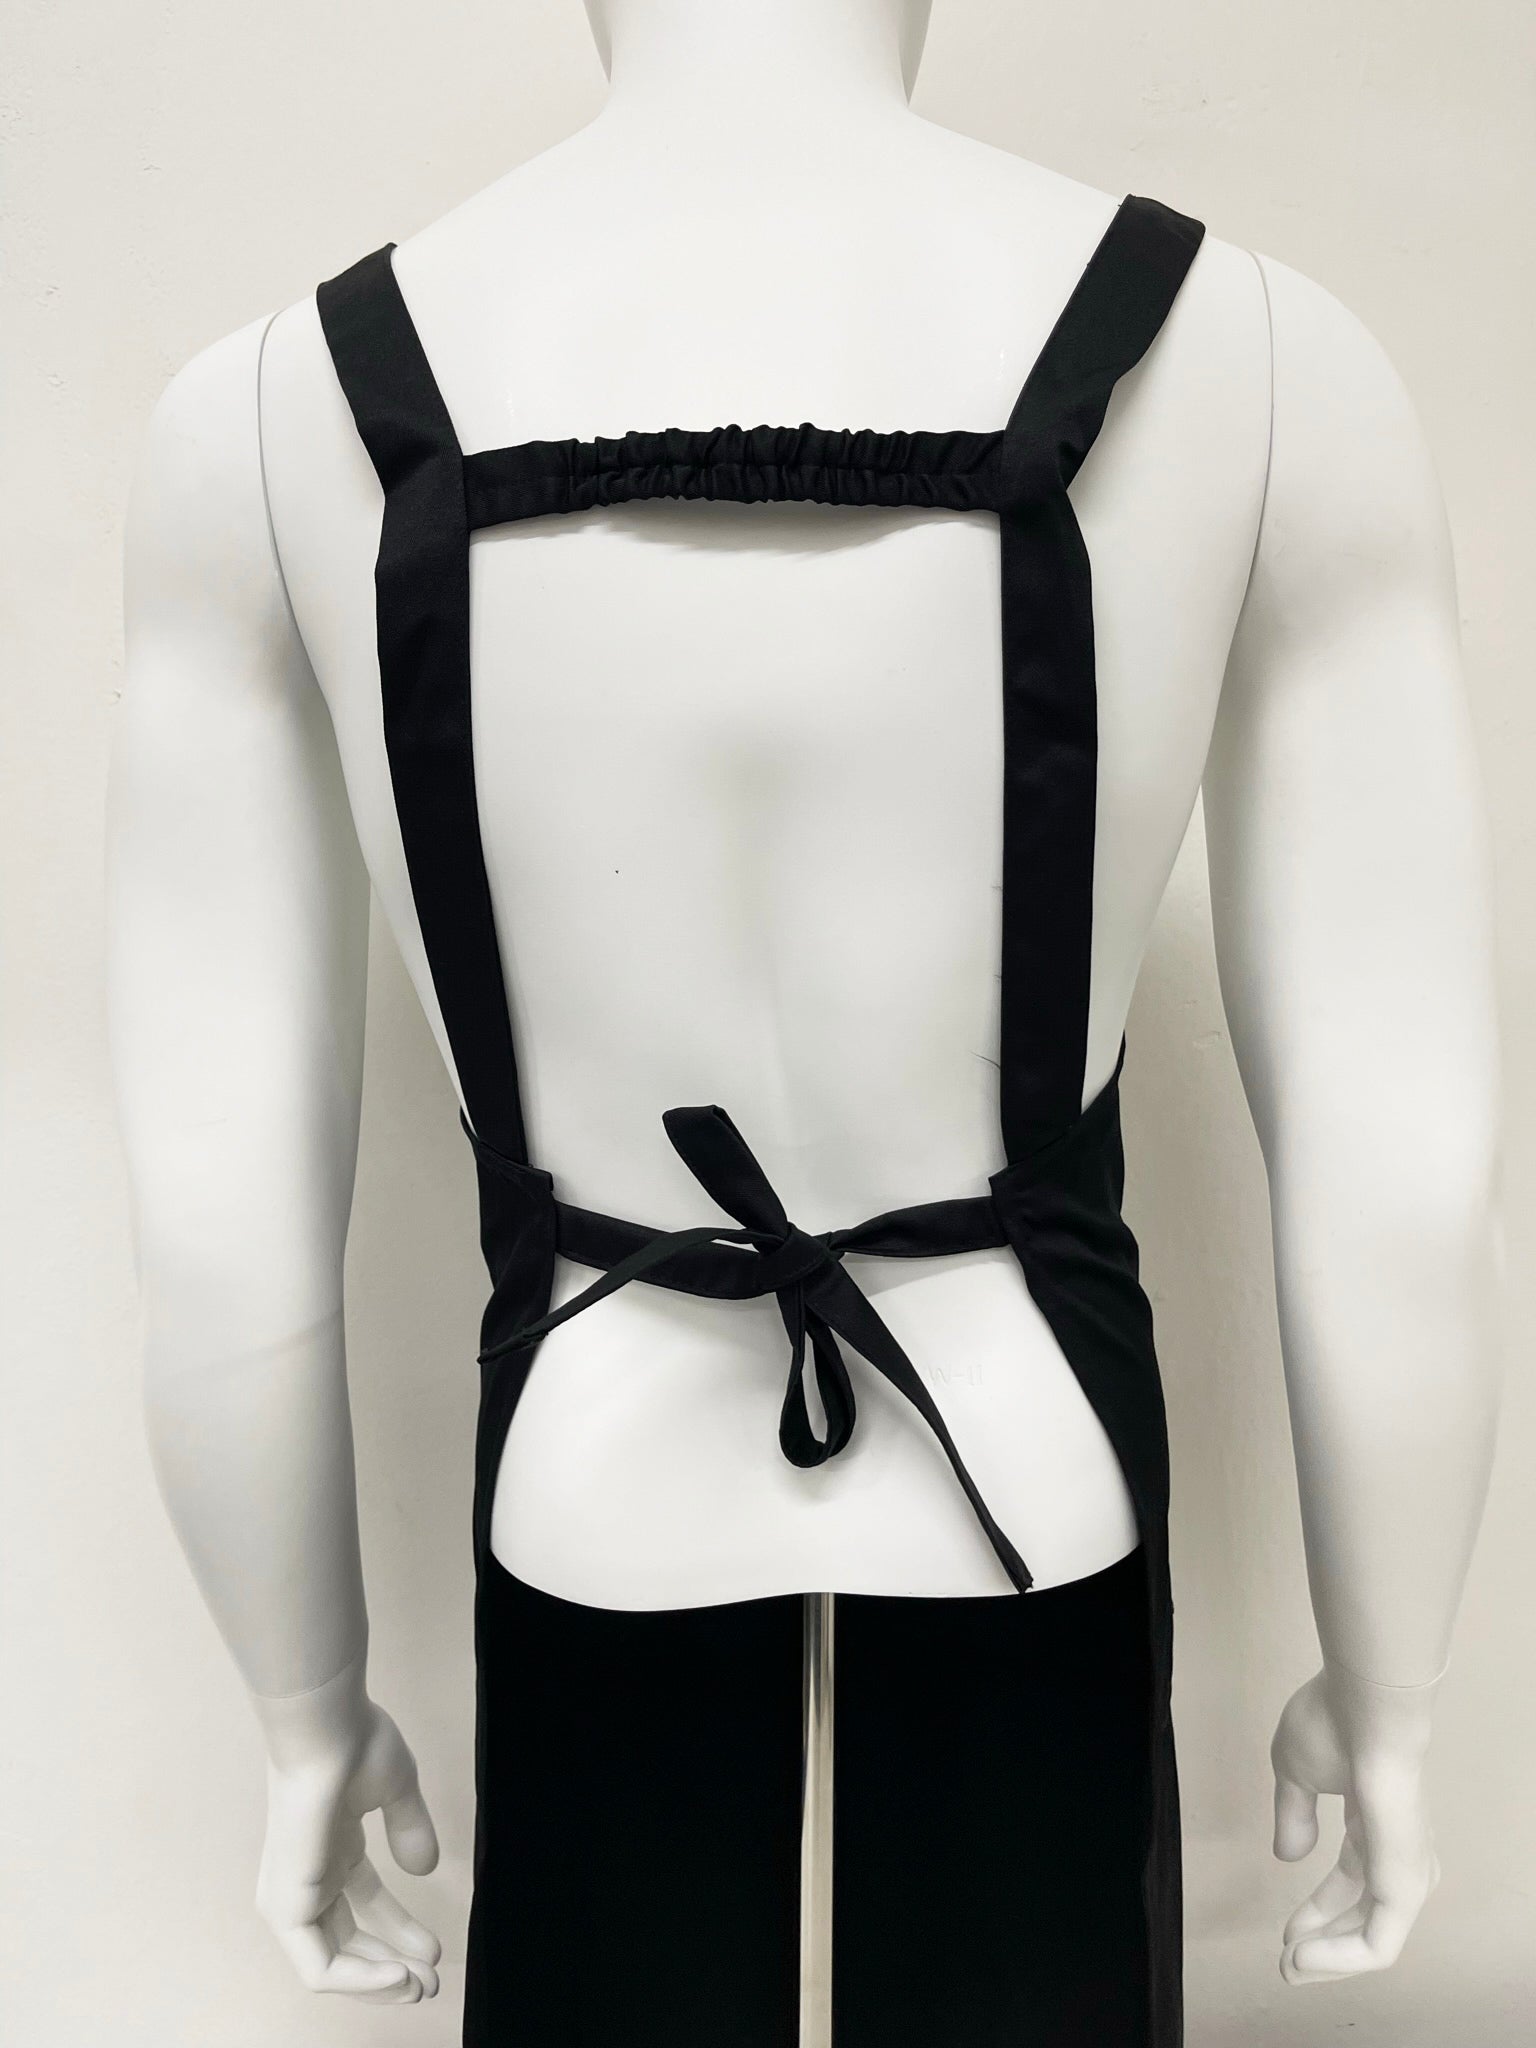 AP011 - Double Shoulder Strap Waterproof & Anti-oil Working Apron with Pockets